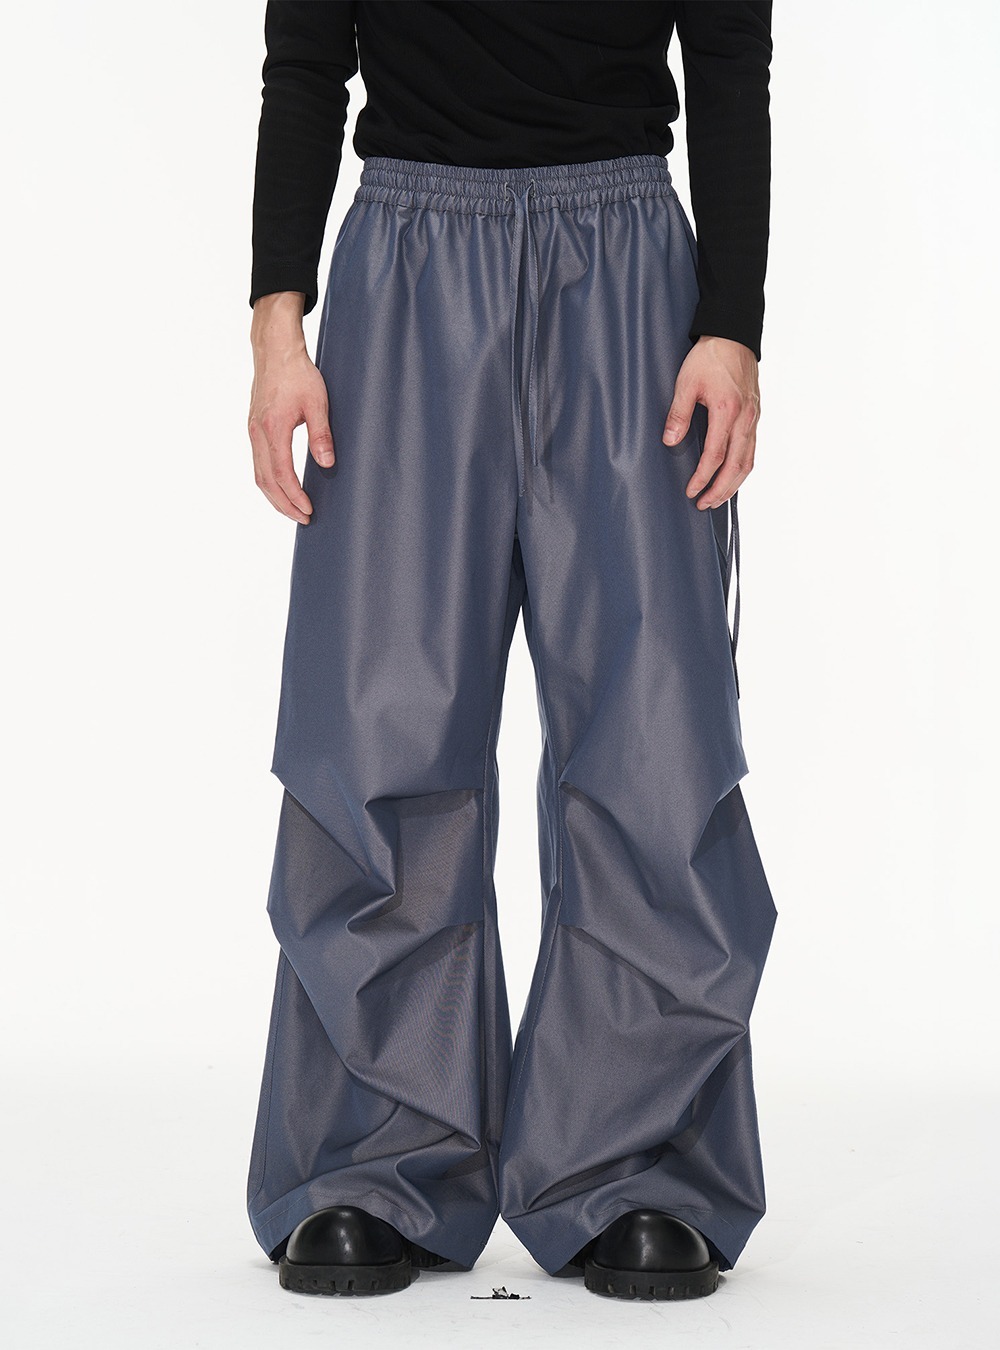 [BLIND NO PLAN] 3D Pleated Silhouette Casual Pants (2color)